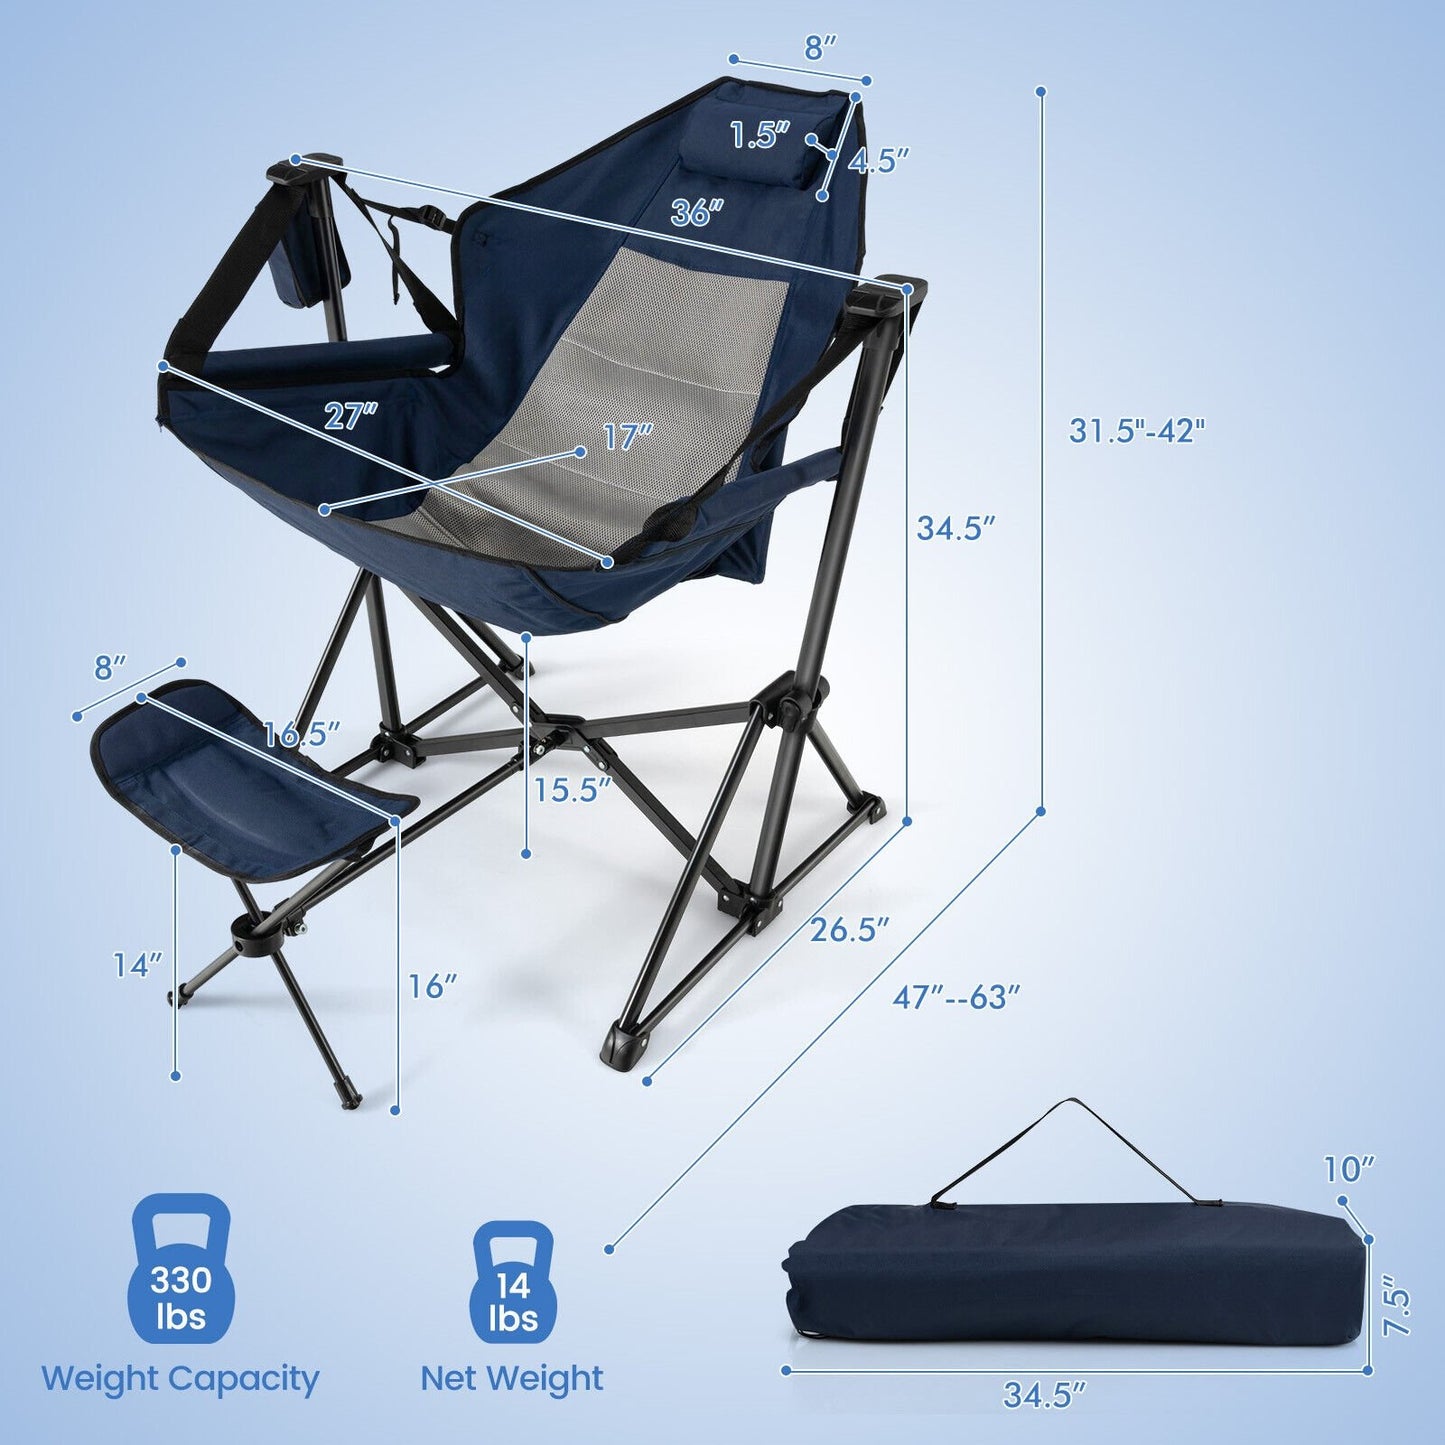 Hammock Camping Chair with Retractable Footrest and Carrying Bag, Navy - Gallery Canada